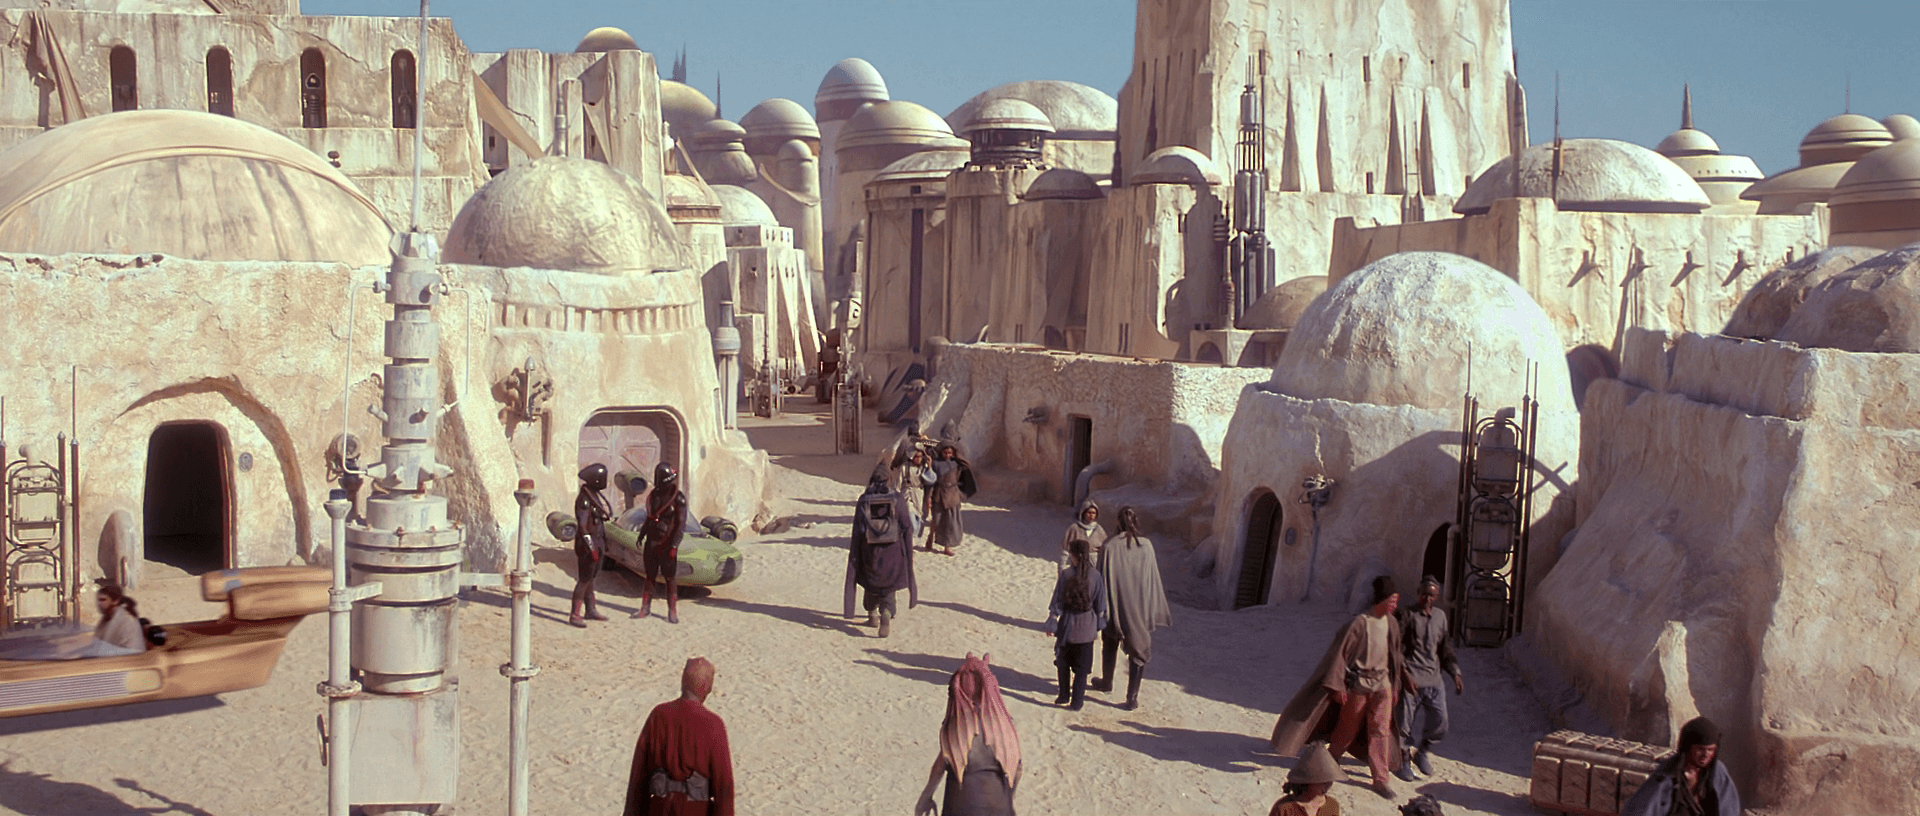 The fictional city of Mos Espa is located within the sand dunes of Tunisia. The characters from Star Wars are walking down the marketplace with many domed buildings and sci fi structures around them. 